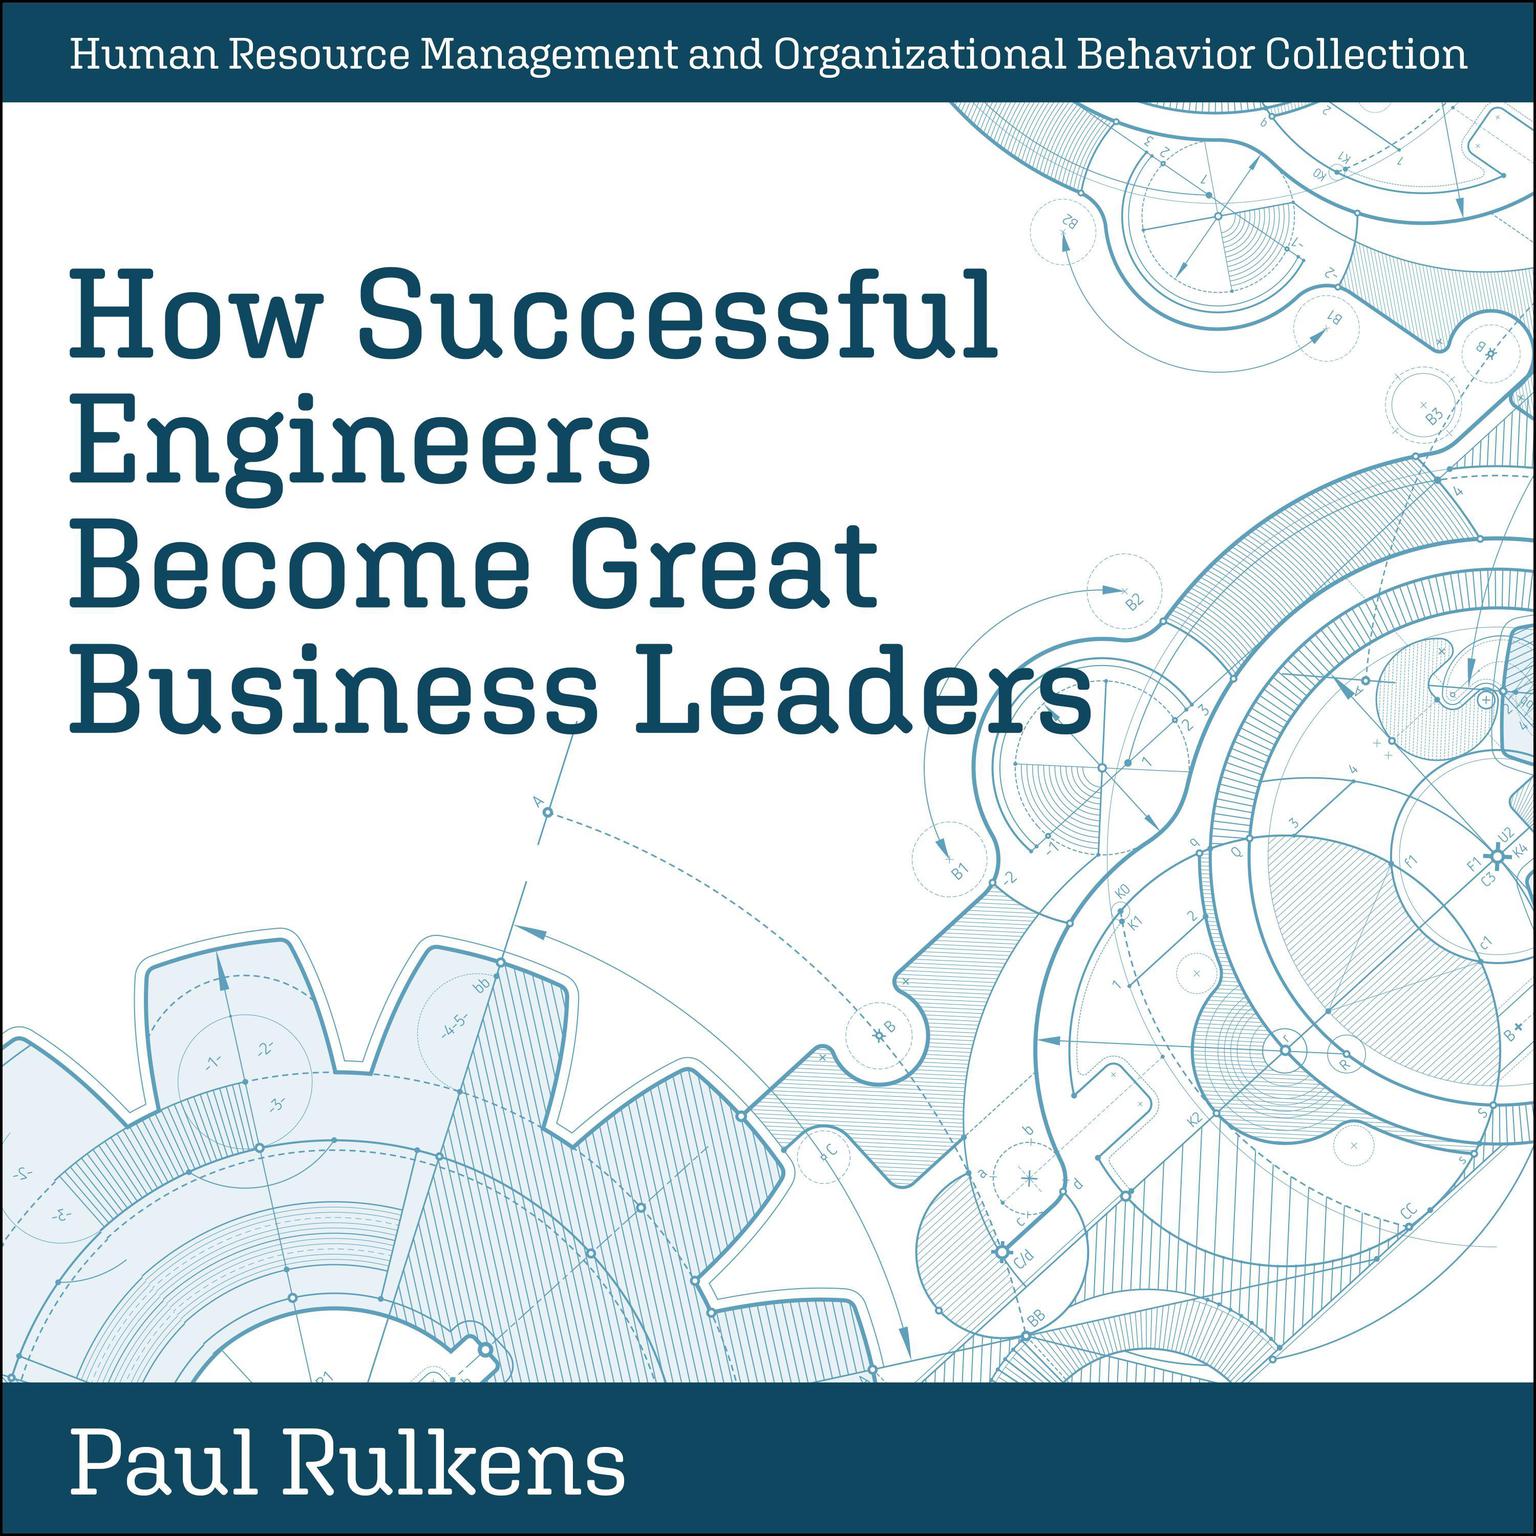 How Successful Engineers Become Great Business Leaders Audiobook, by Paul Rulkens